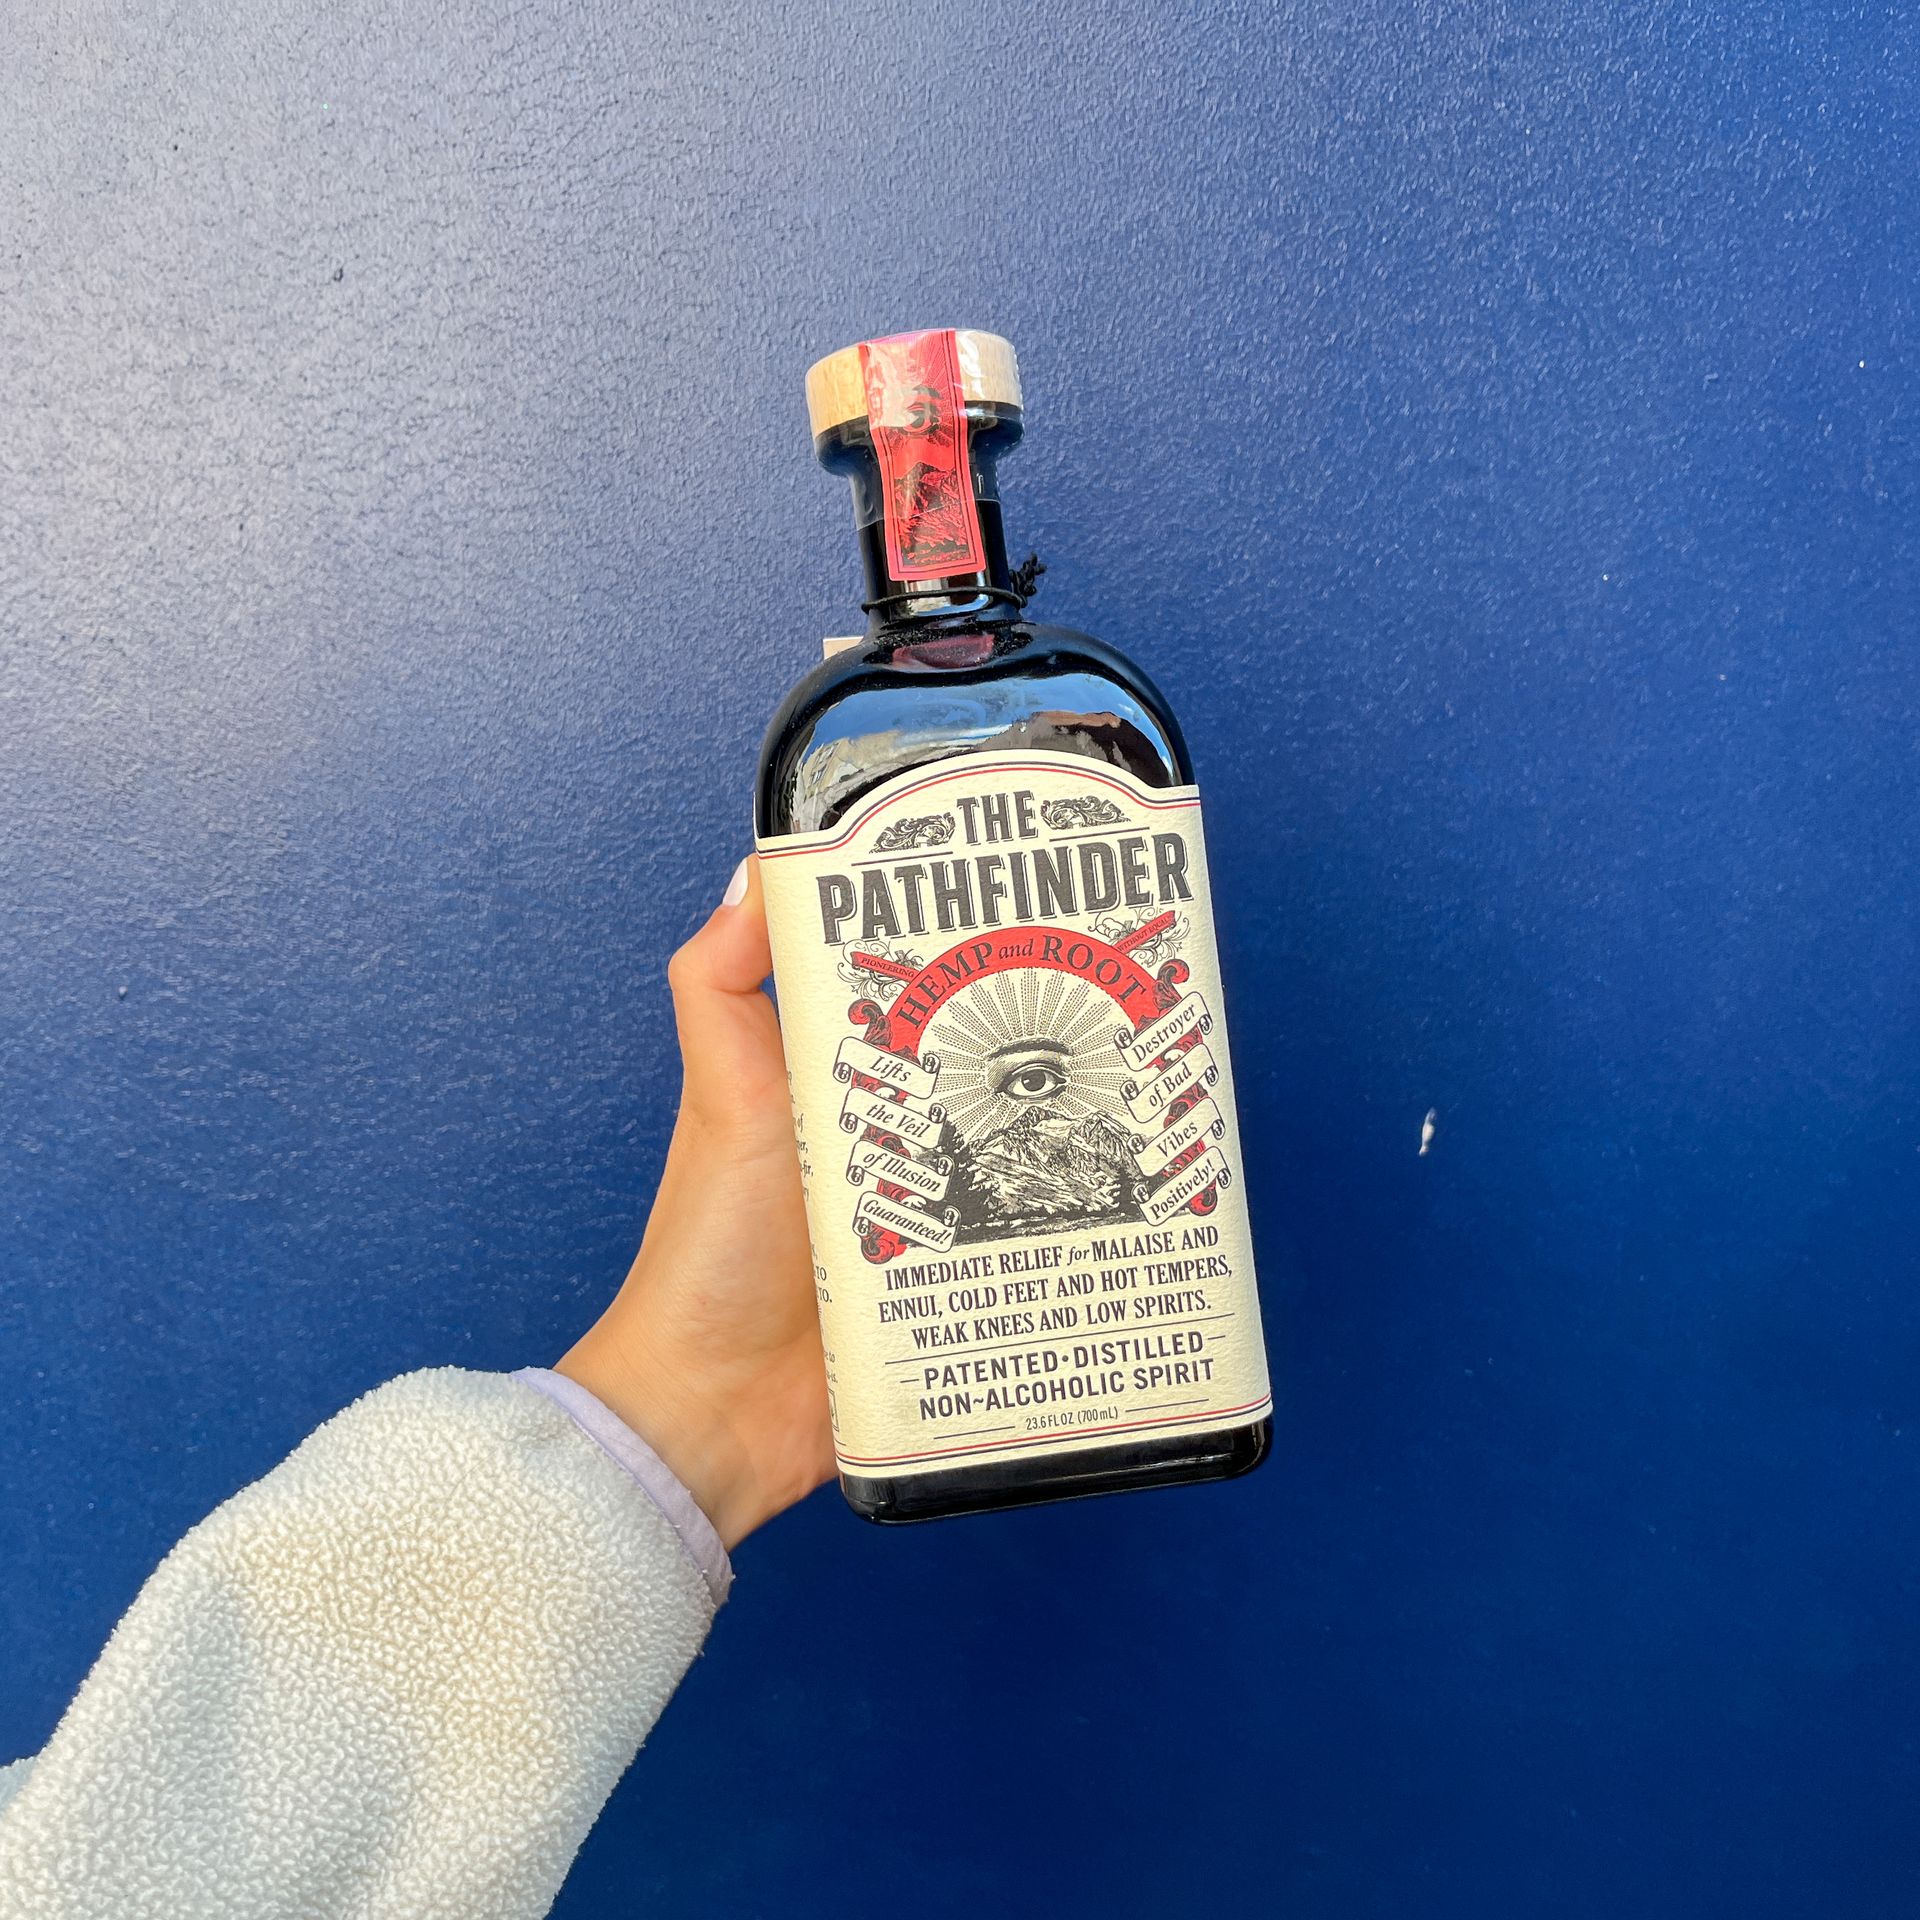 A hand holding up a bottle of The Pathfinder: Hemp & Root in front of a blue background.